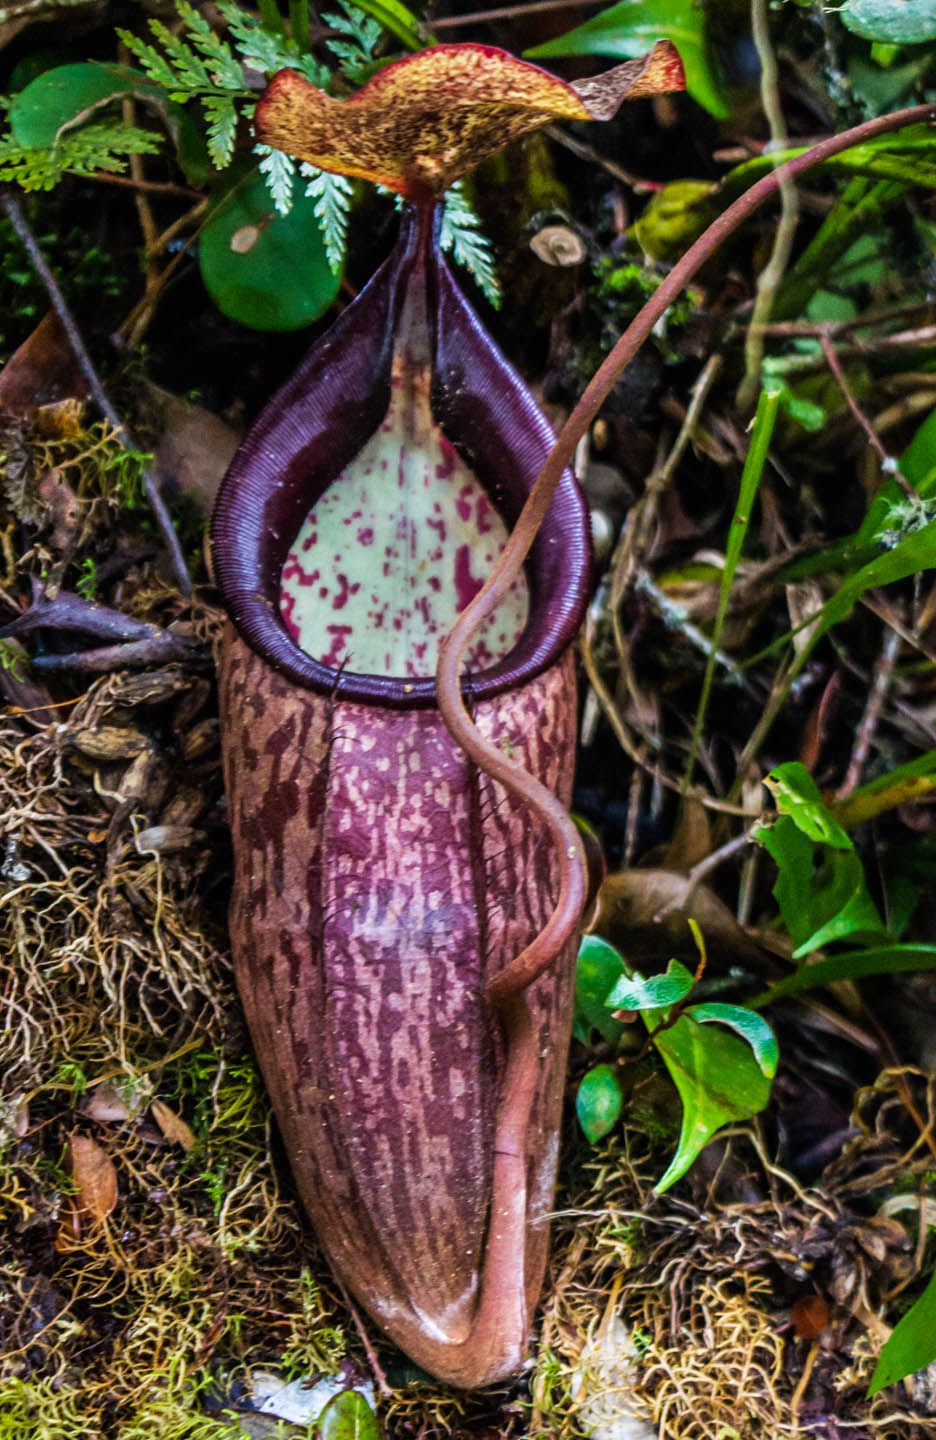 Pitcher plant at the mossy forest, Cameron Highlands, Malaysia